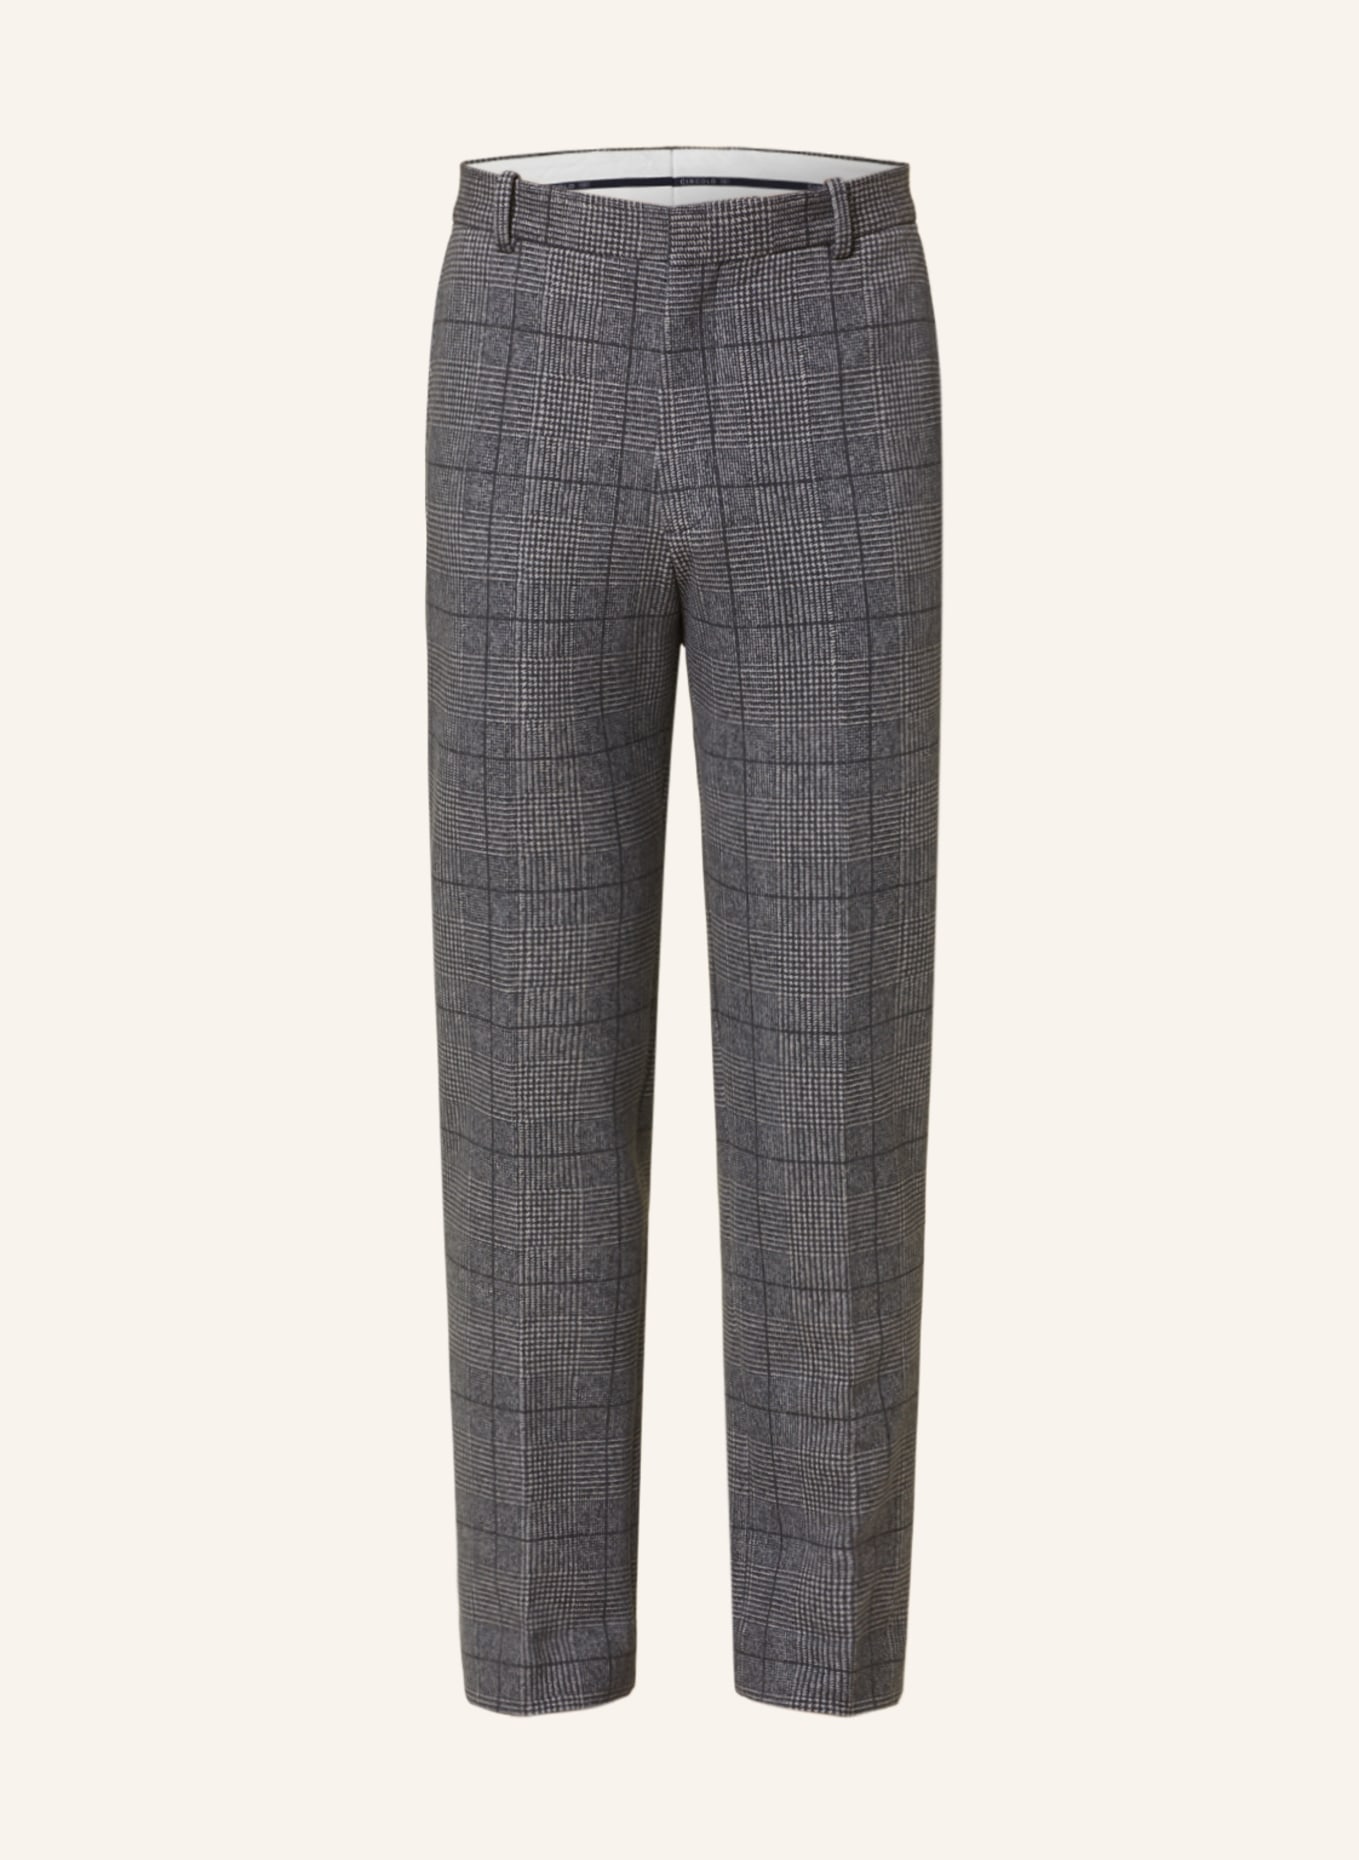 CIRCOLO 1901 Suit trousers regular fit made of jersey, Color: GRAY/ BLUE (Image 1)